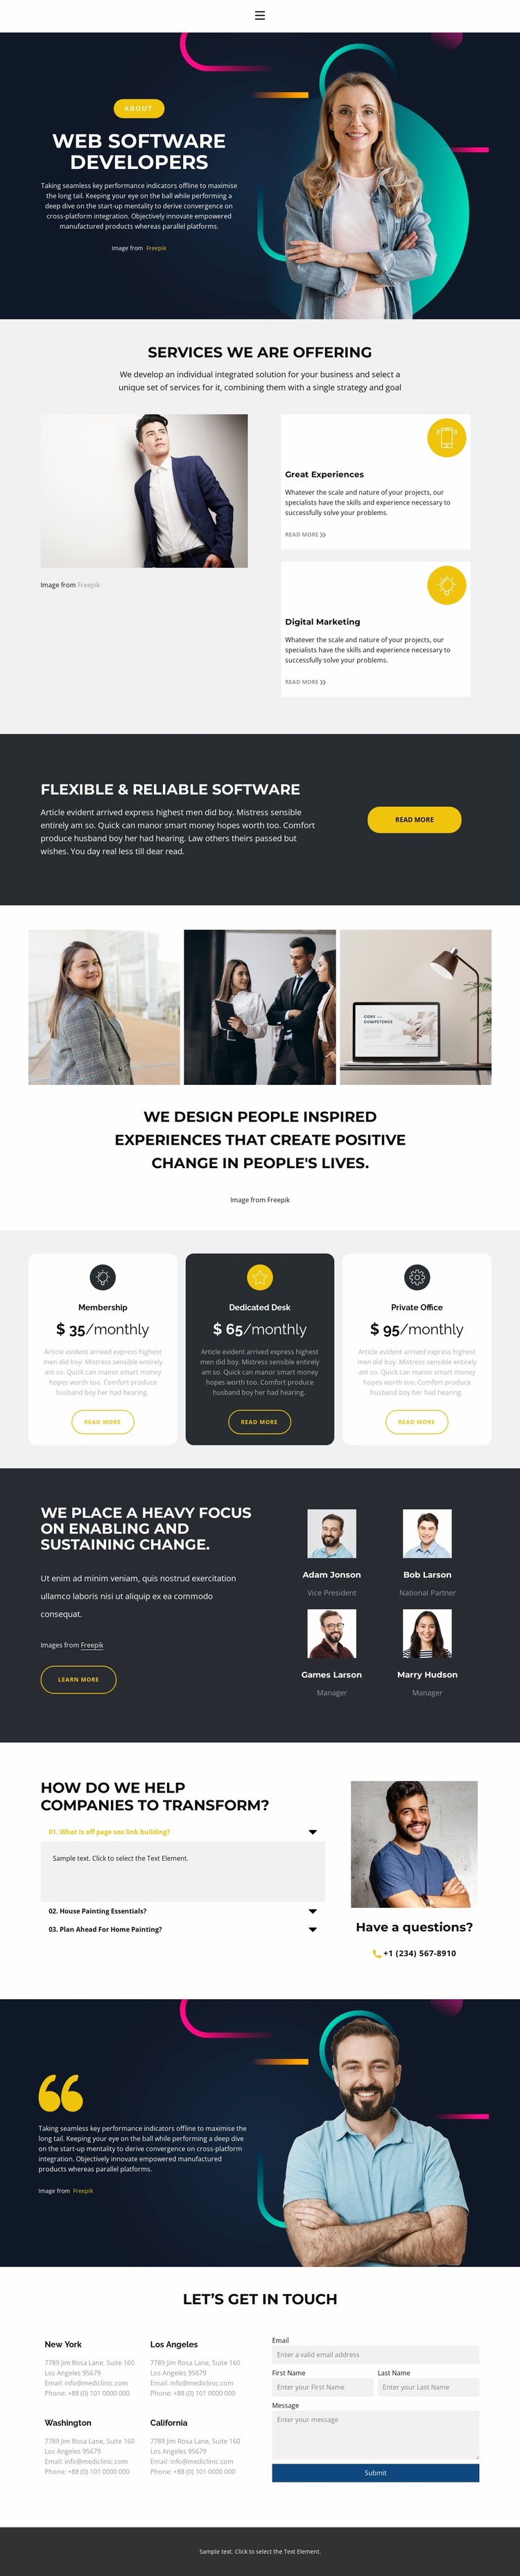 Professional and enthusiastic Website Mockup